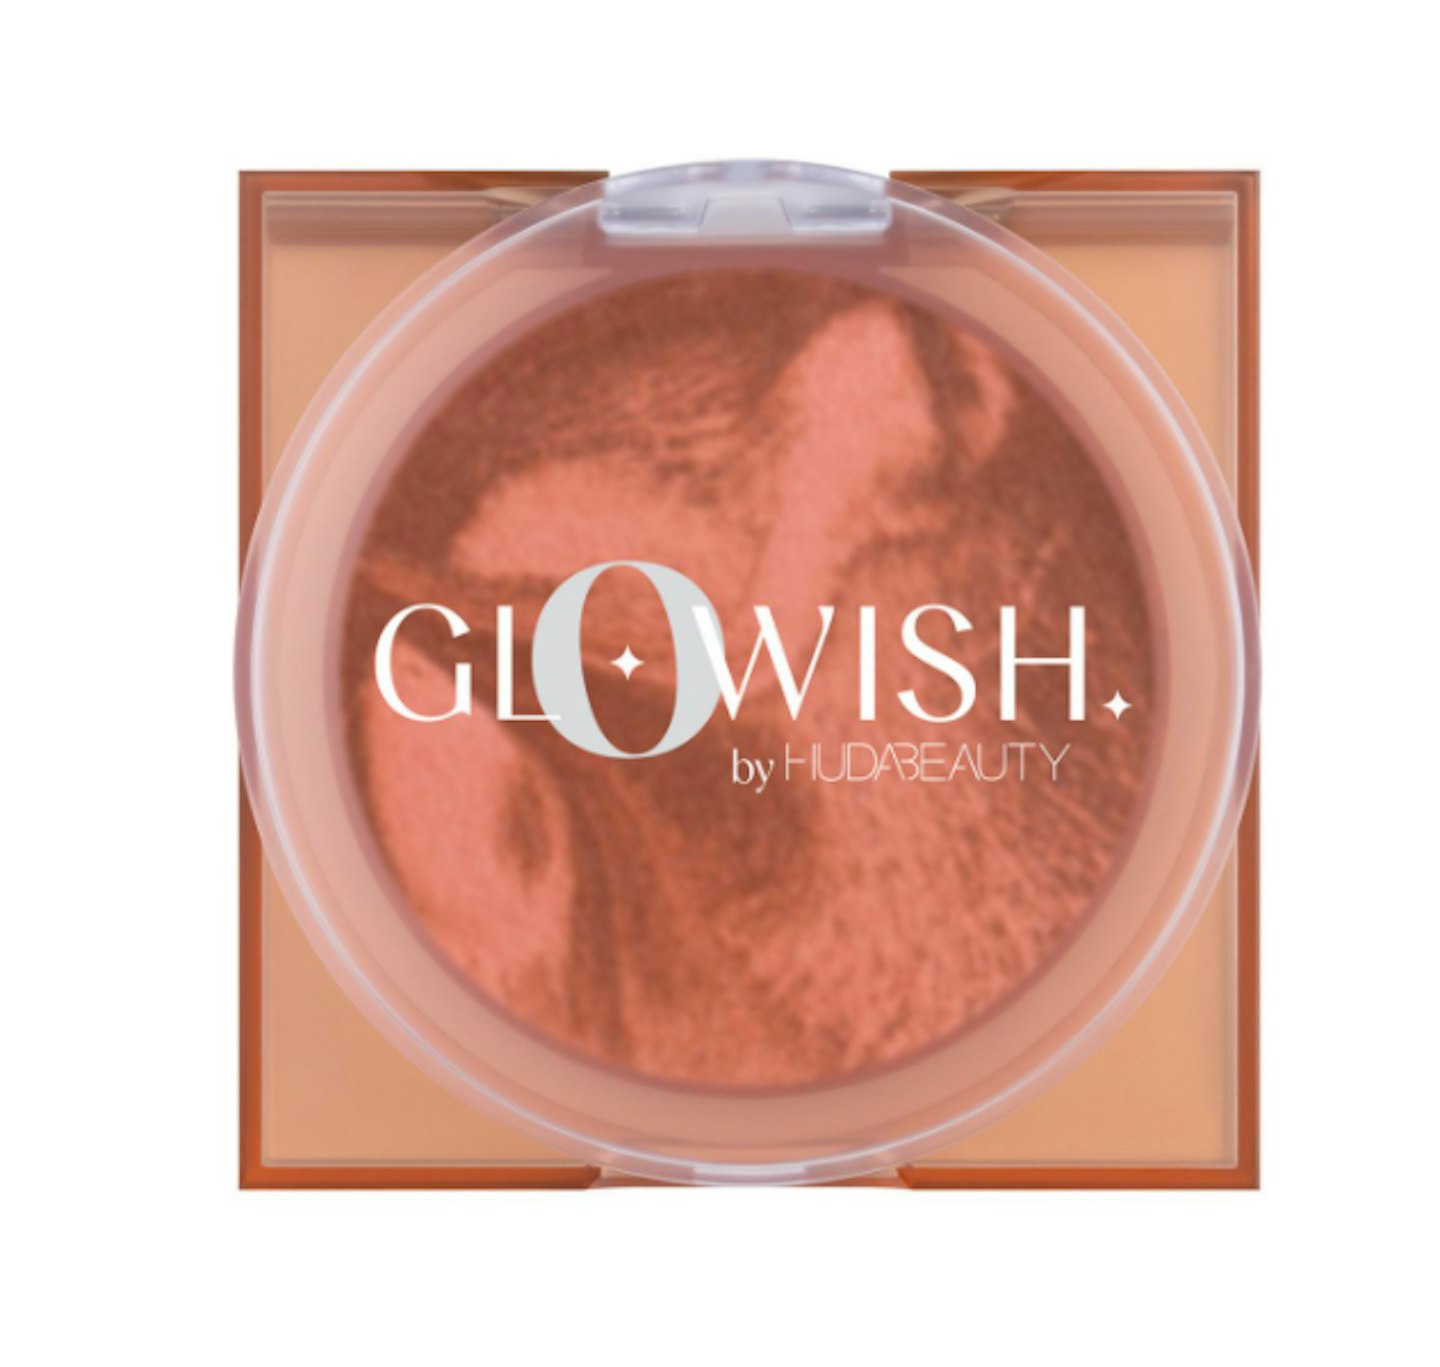 GloWish Is The Latest Launch From HUDA Beauty. Here's What You Need To Know